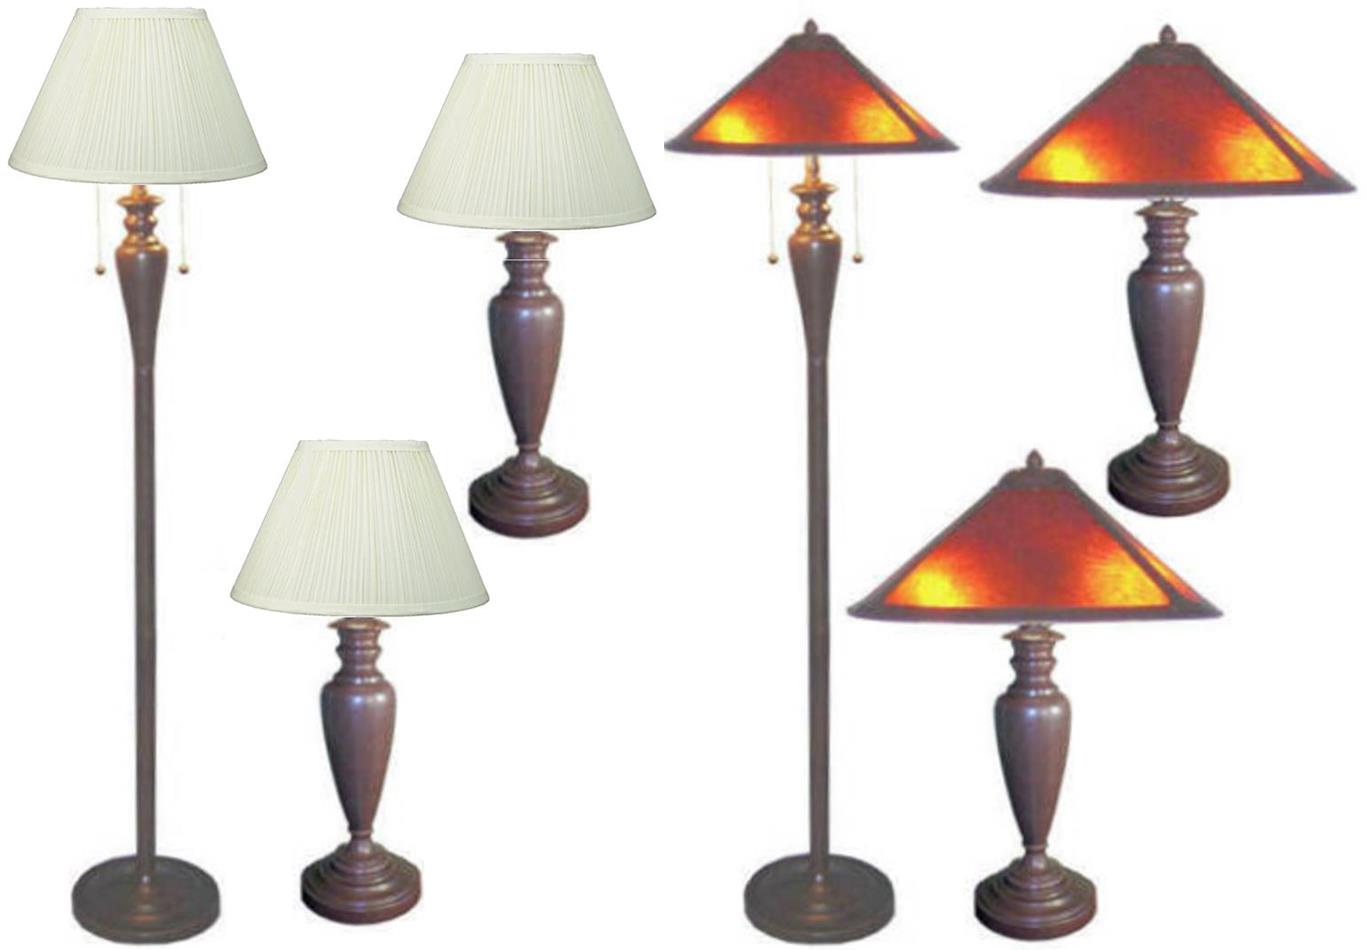 3 Piece Mission Lamp Set Fabric or Mica Shades - Sale !